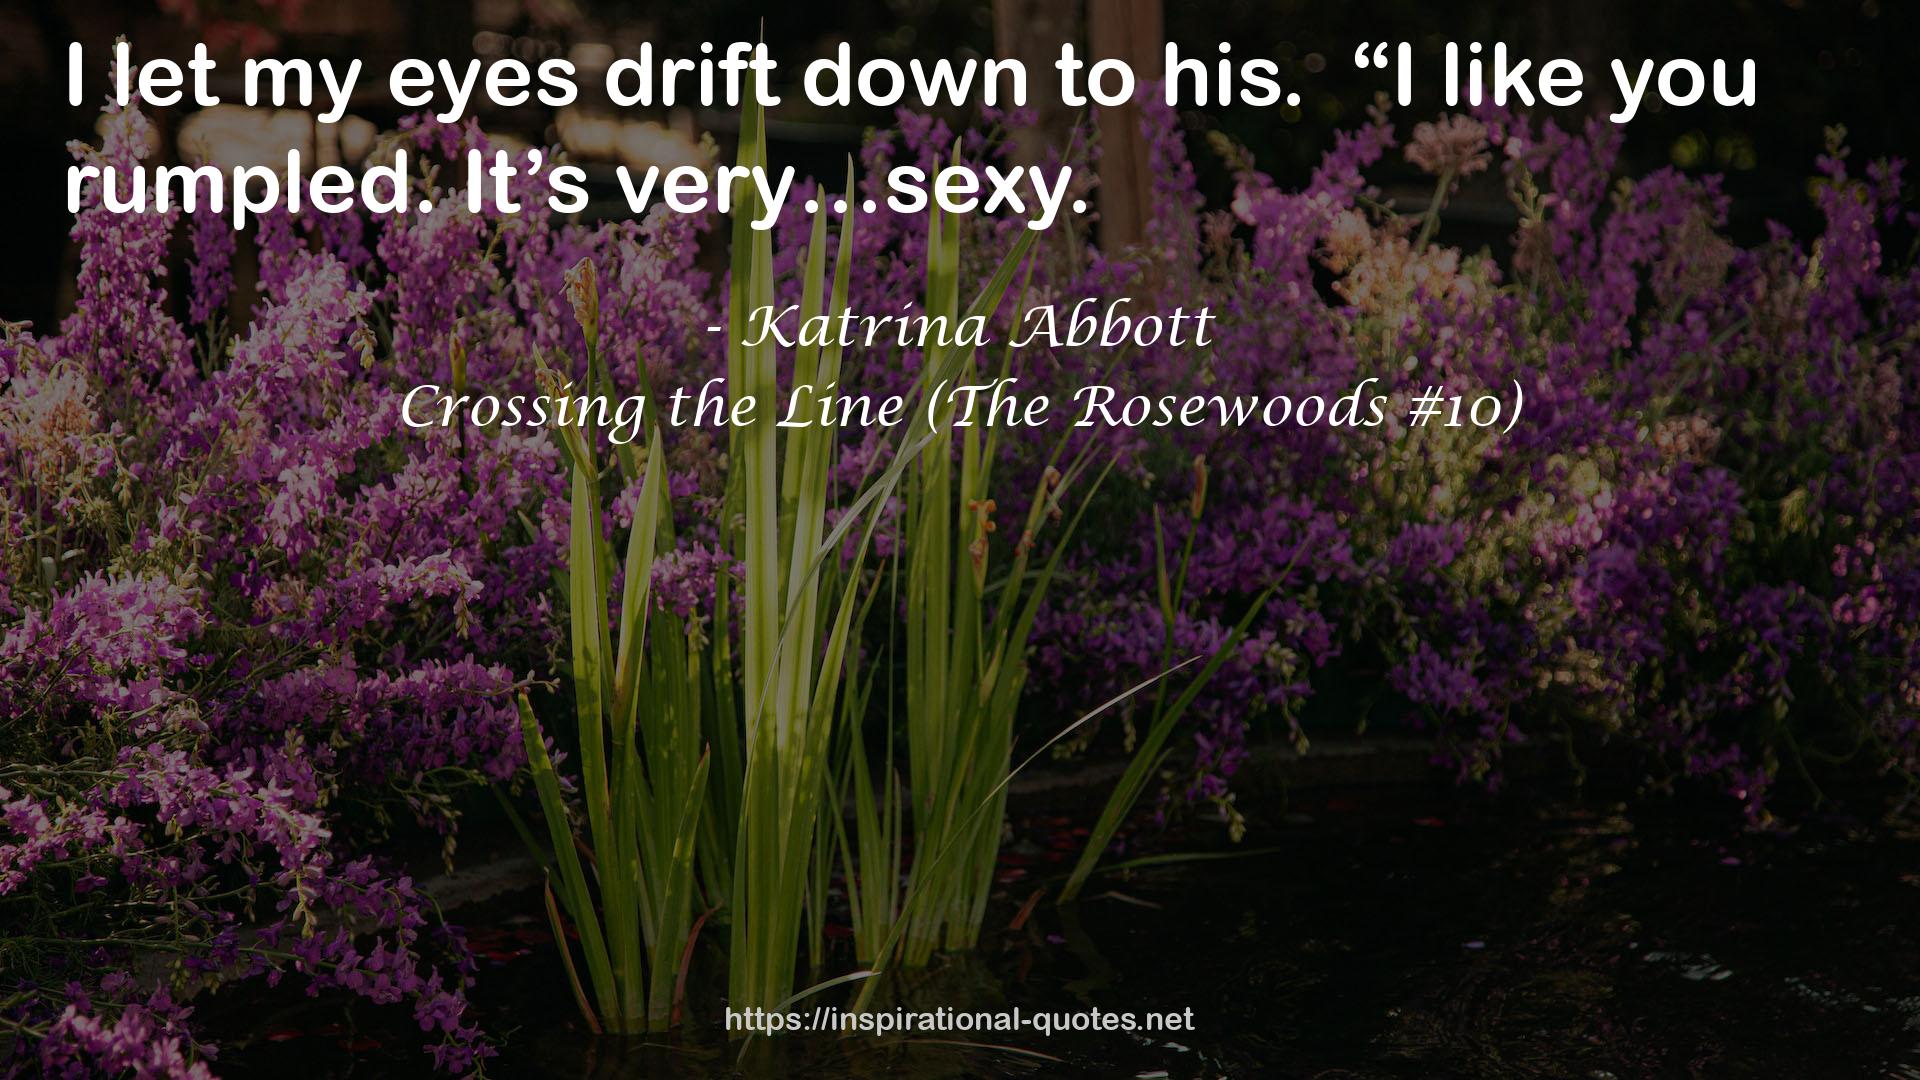 Crossing the Line (The Rosewoods #10) QUOTES